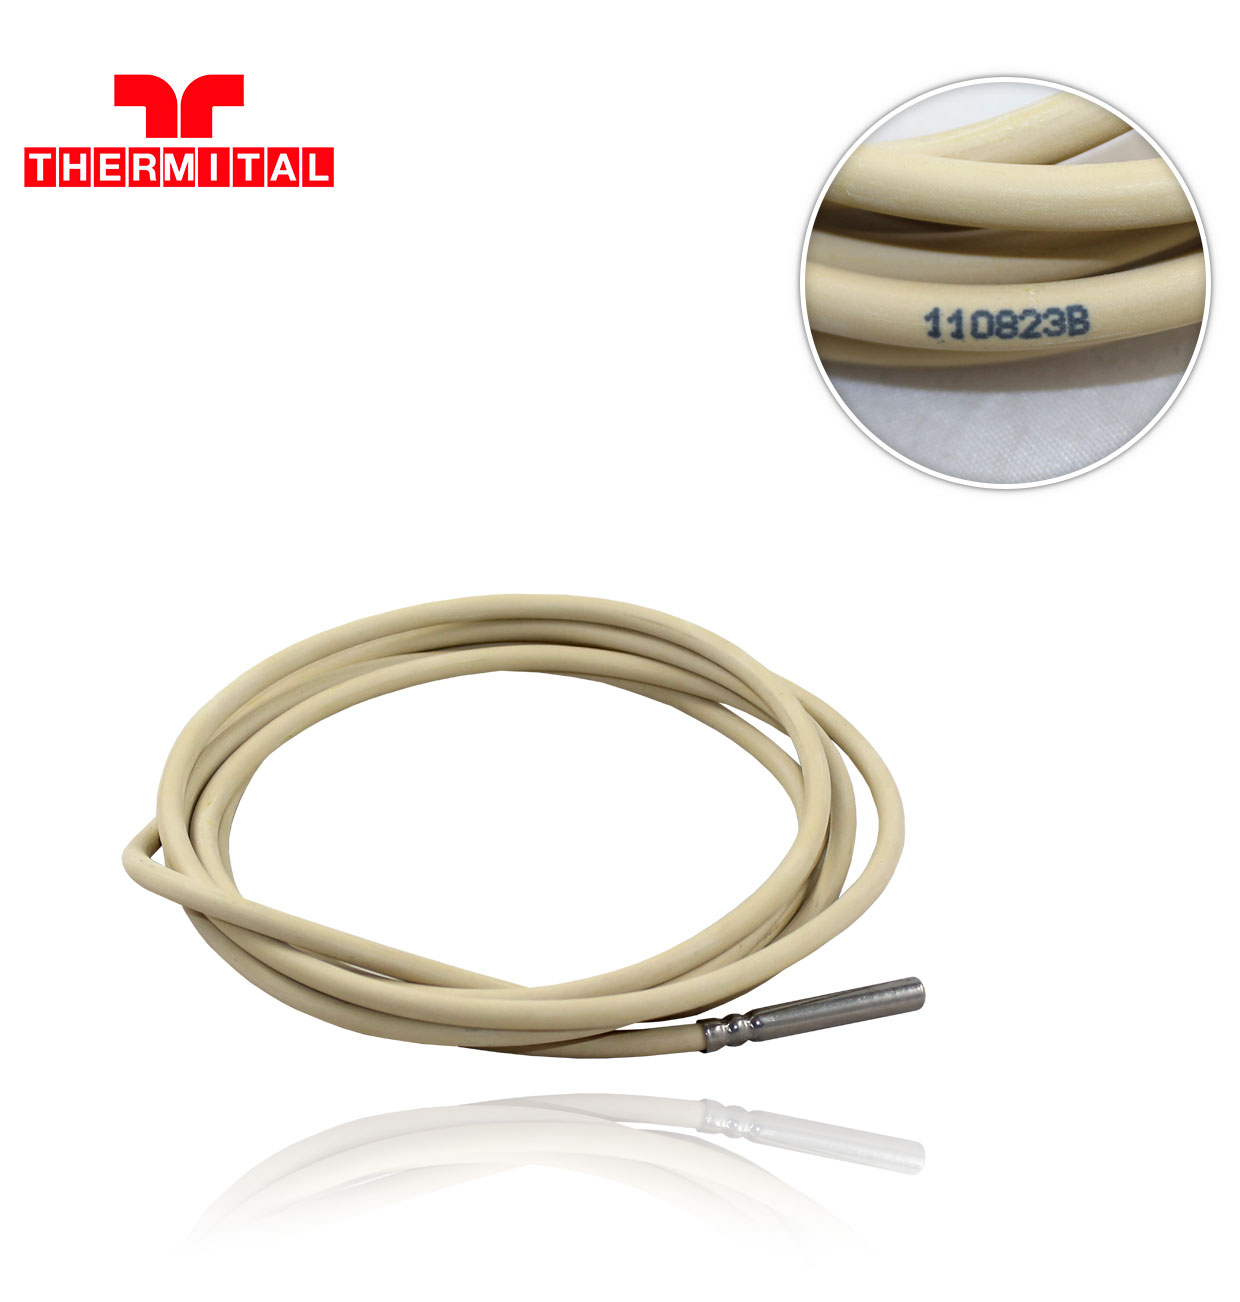 THERMITAL 22518 IMMERSION PROBE